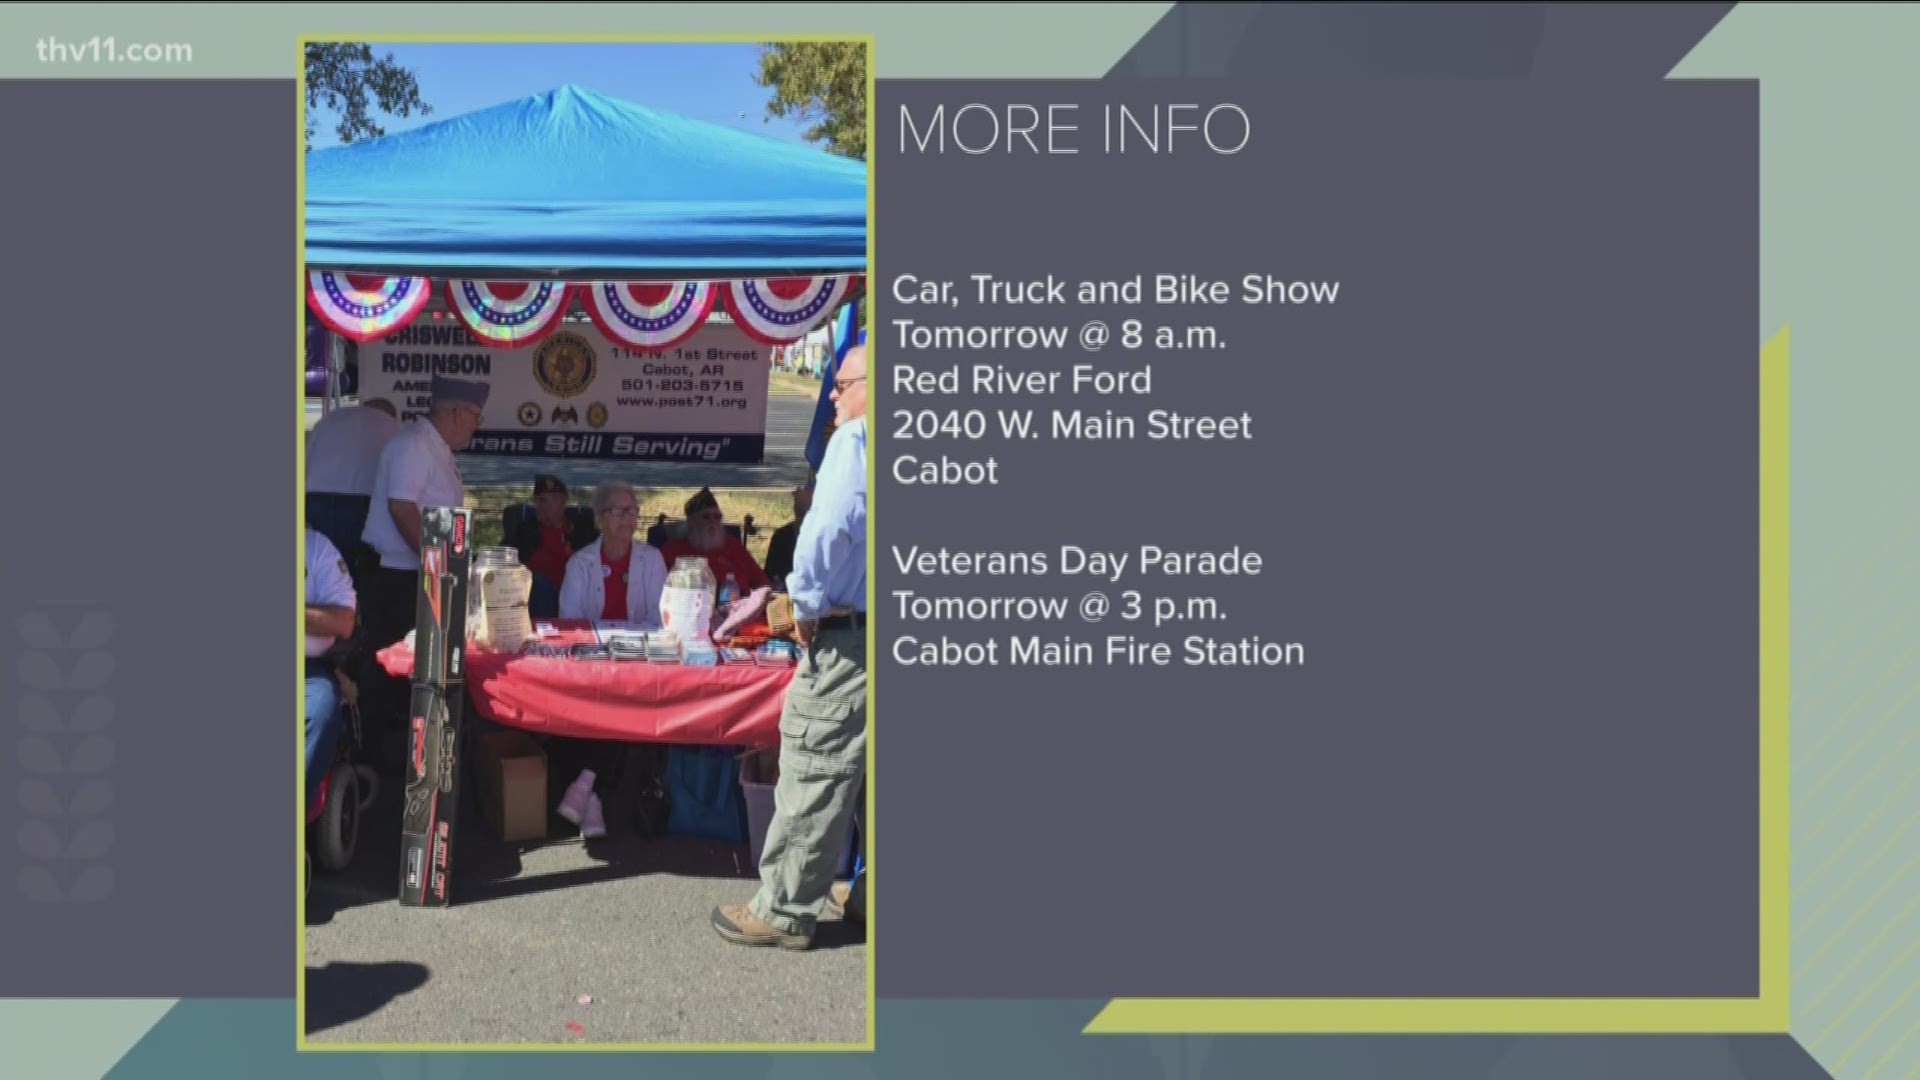 Monday is Veterans Day and to show appreciation for the men and women who have served, Cabot is holding a 'Veteran's Day Parade'.